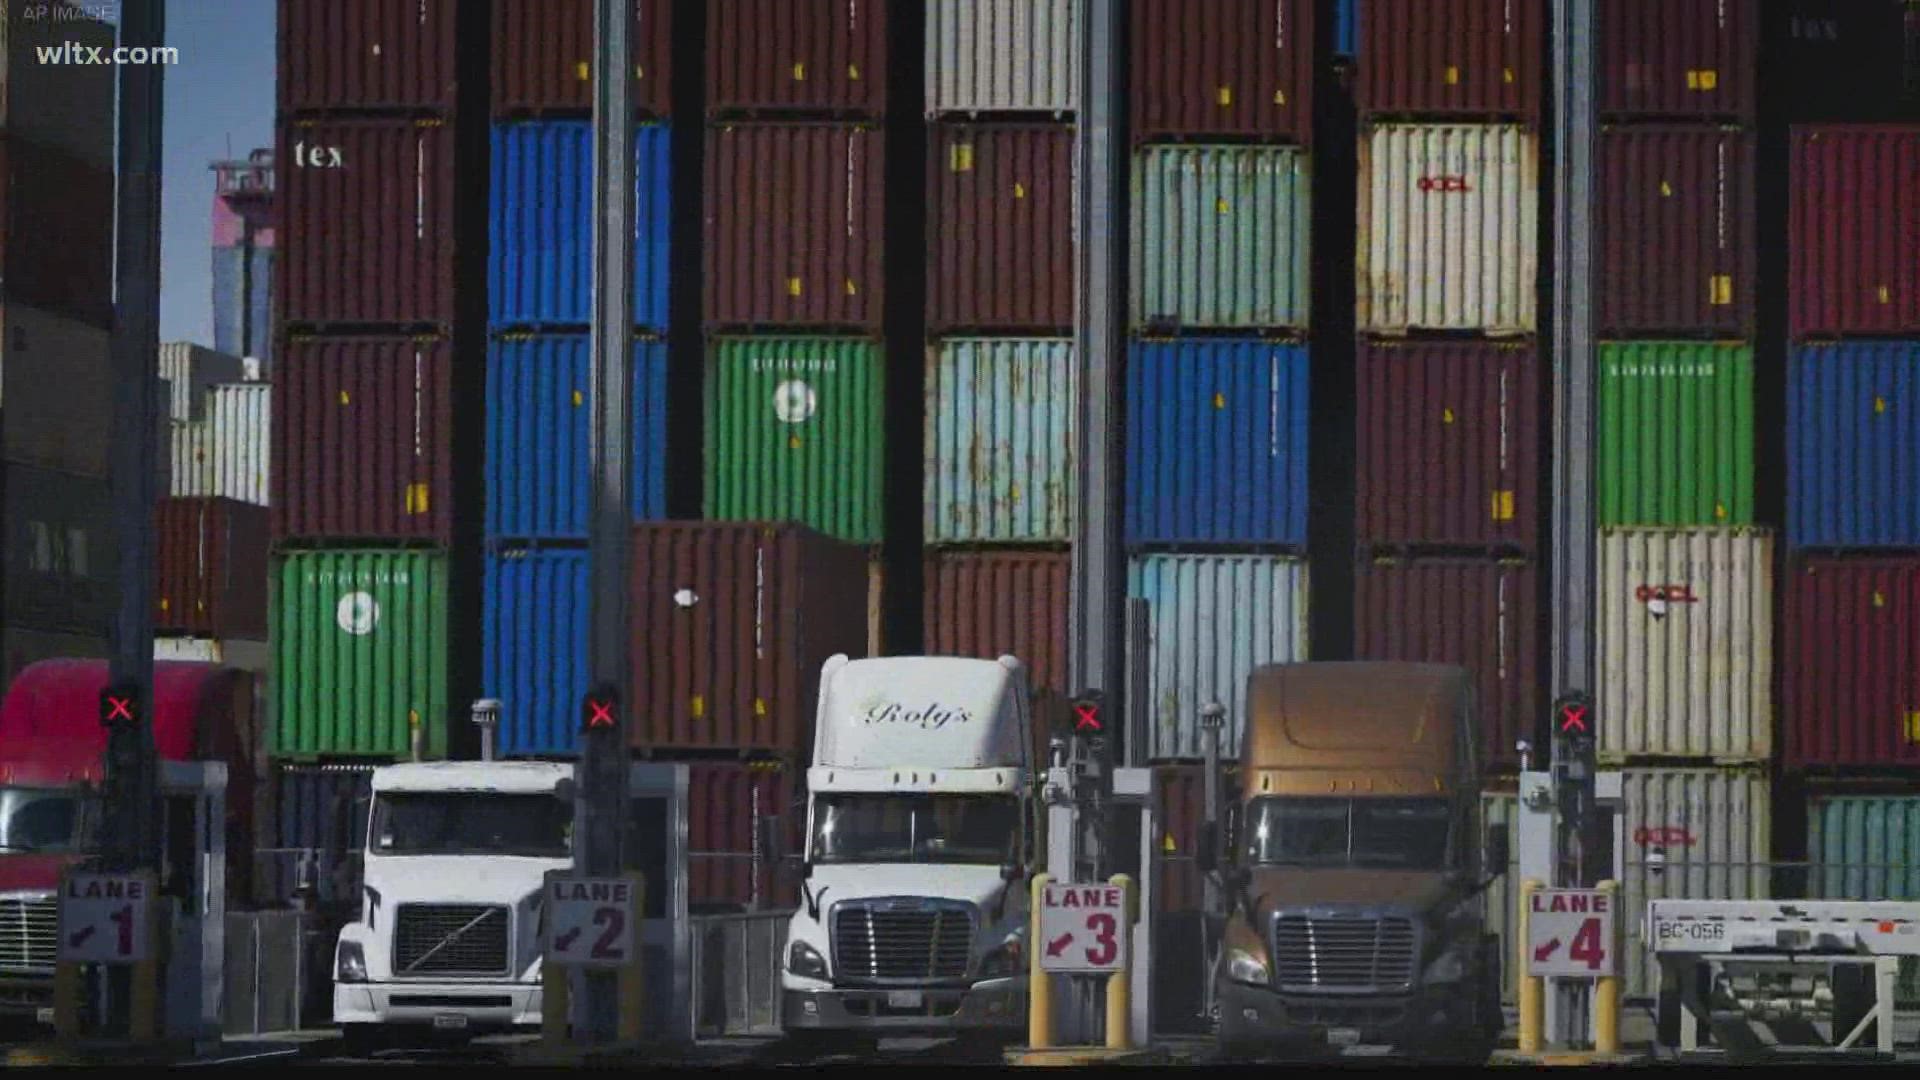 A nationwide truck driver shortage is adding pressure to an already struggling system, worsening the supply chain crisis.